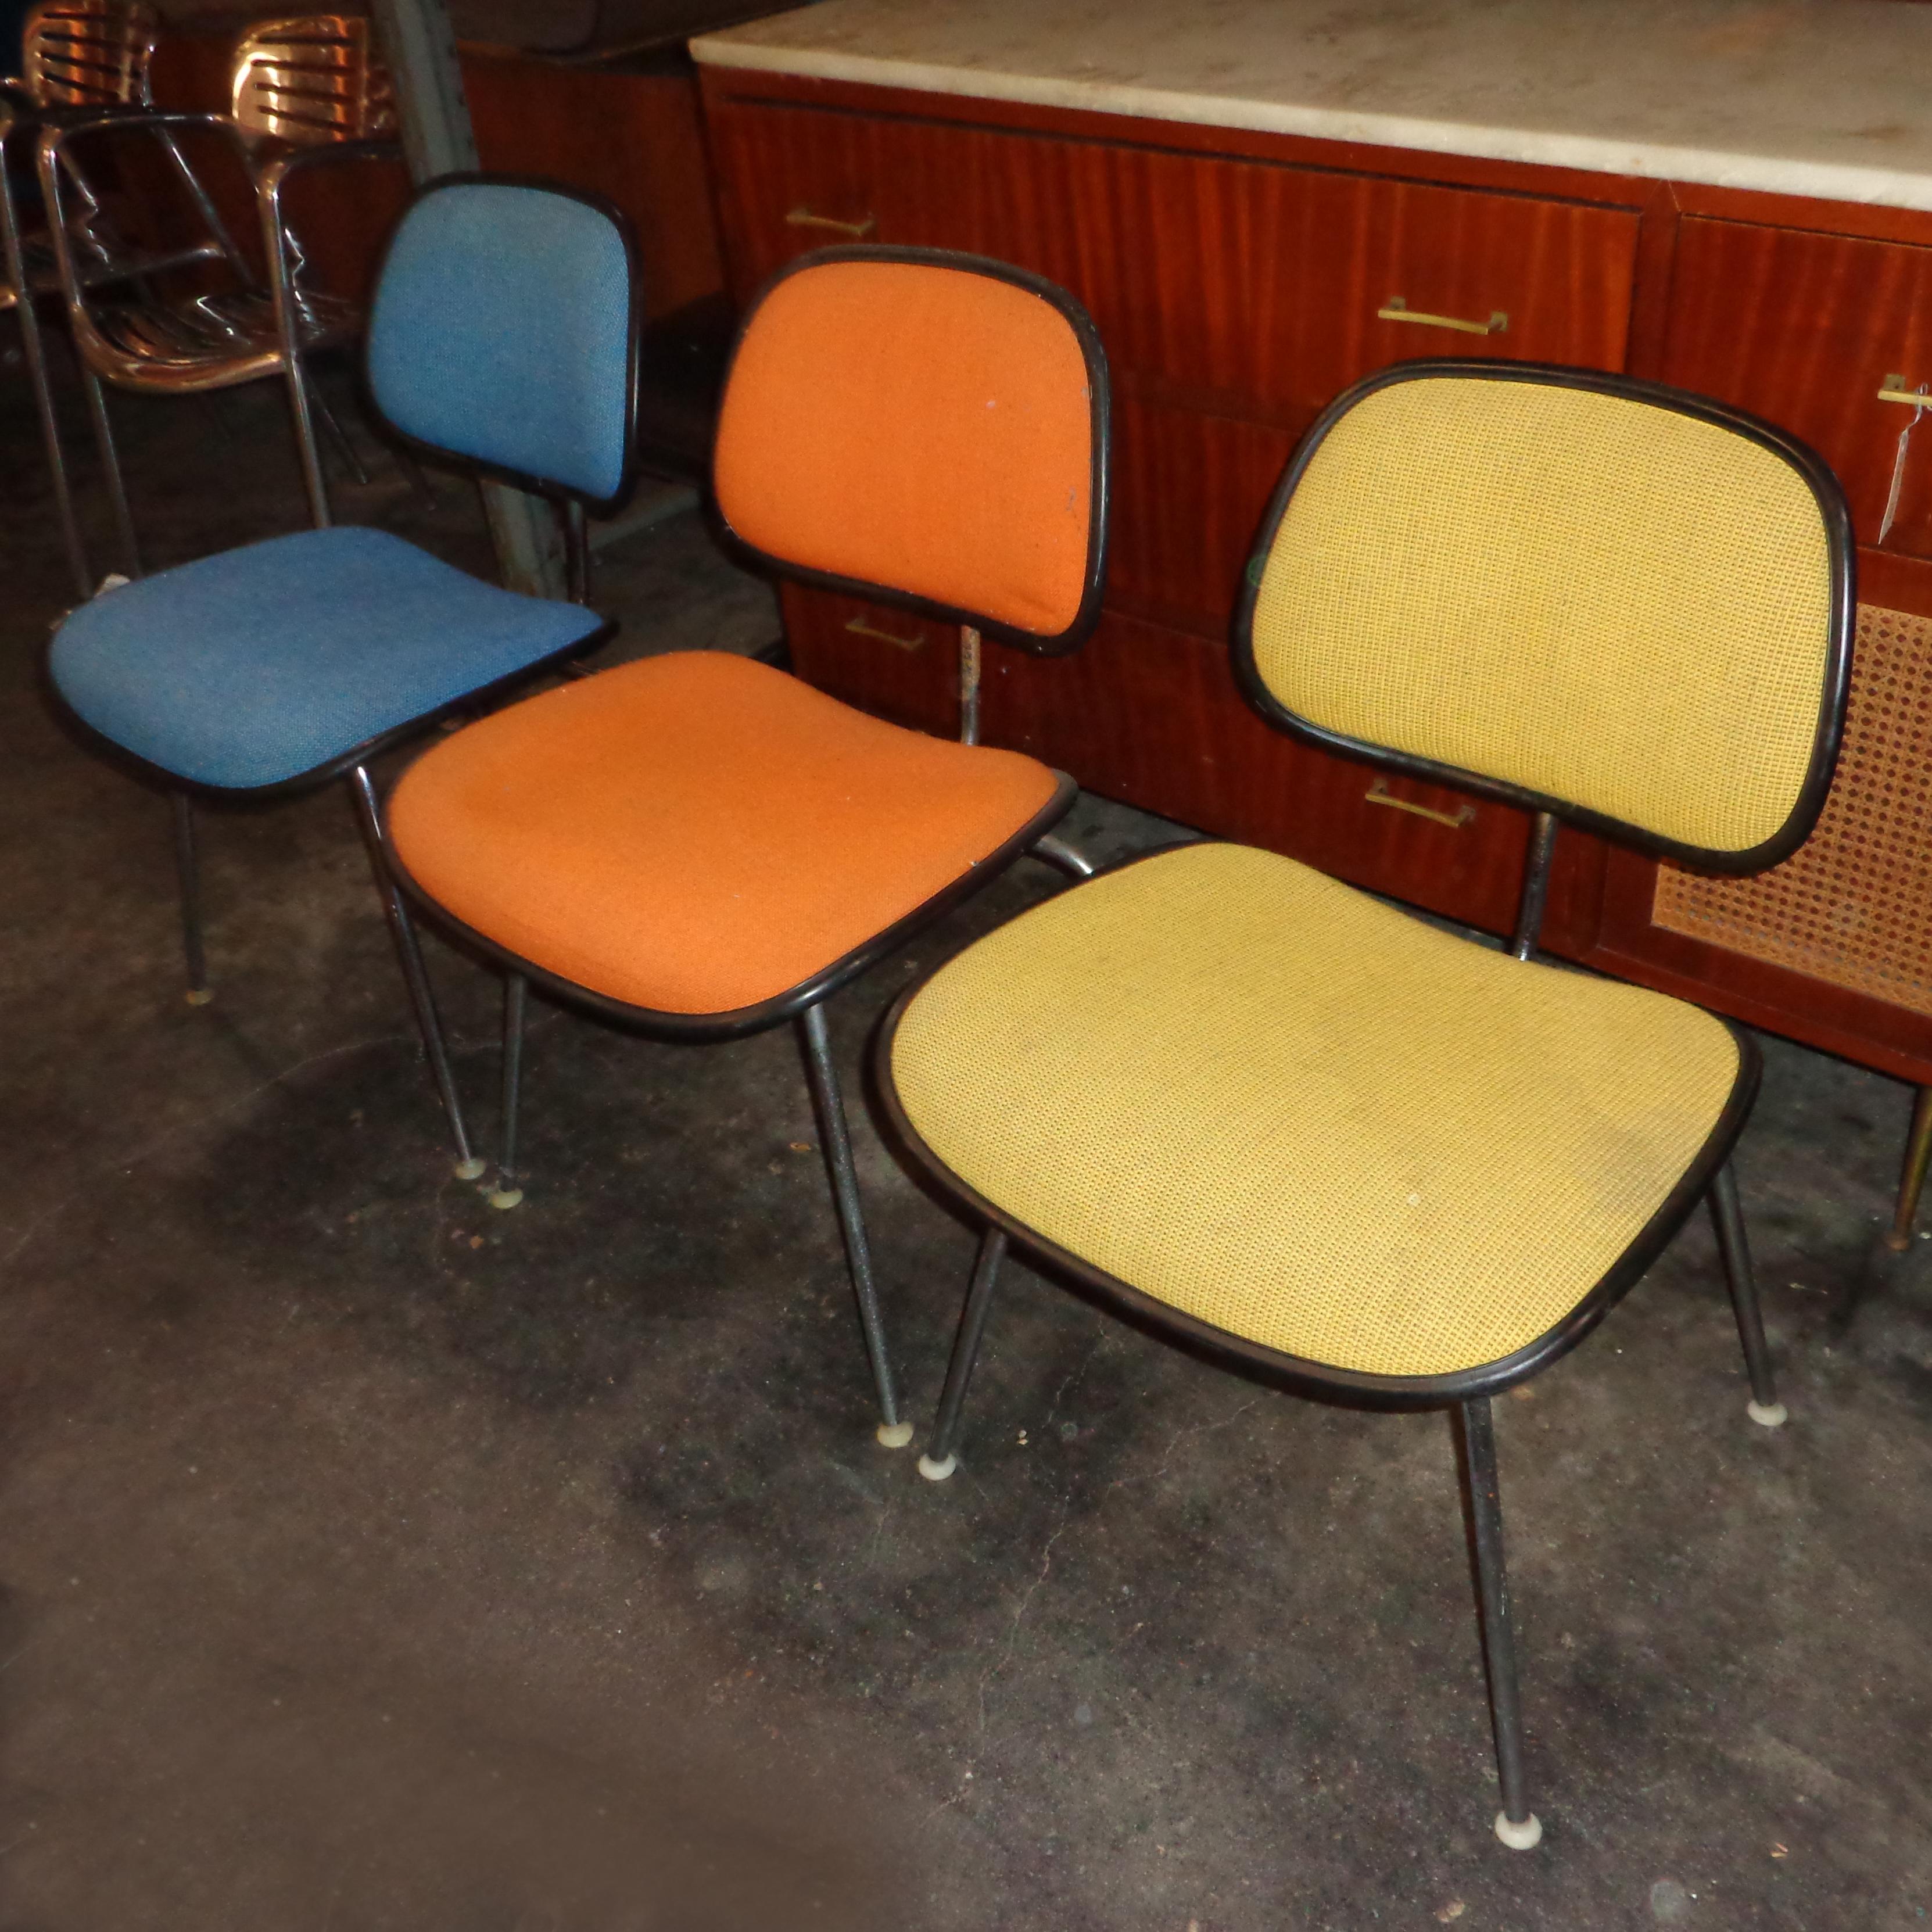 Classic Eames design, these DCMs (Dining Chair Metal) are available in a variety of colors in a upholstered seat and back with black rubber edging, chromed metal back, support and legs. Seat and back are molded plastic.

Price is for one chair.